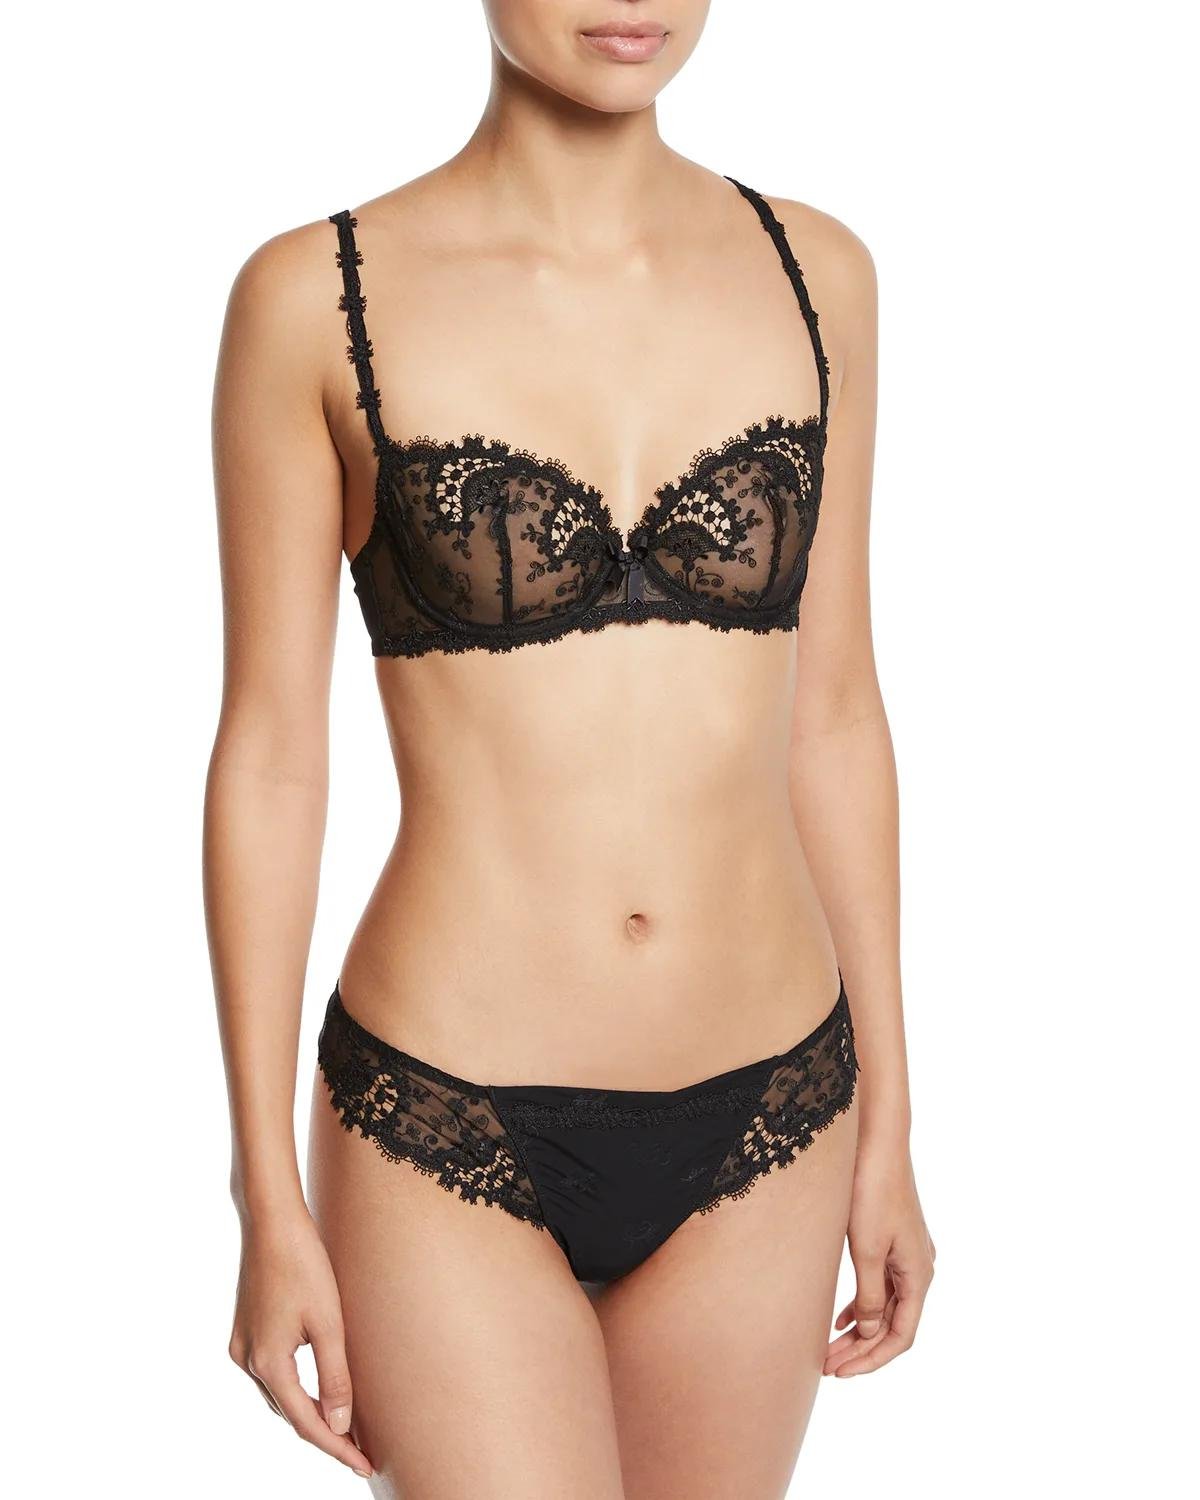 Wish Lace Lingerie Collection by SIMONE PERELE